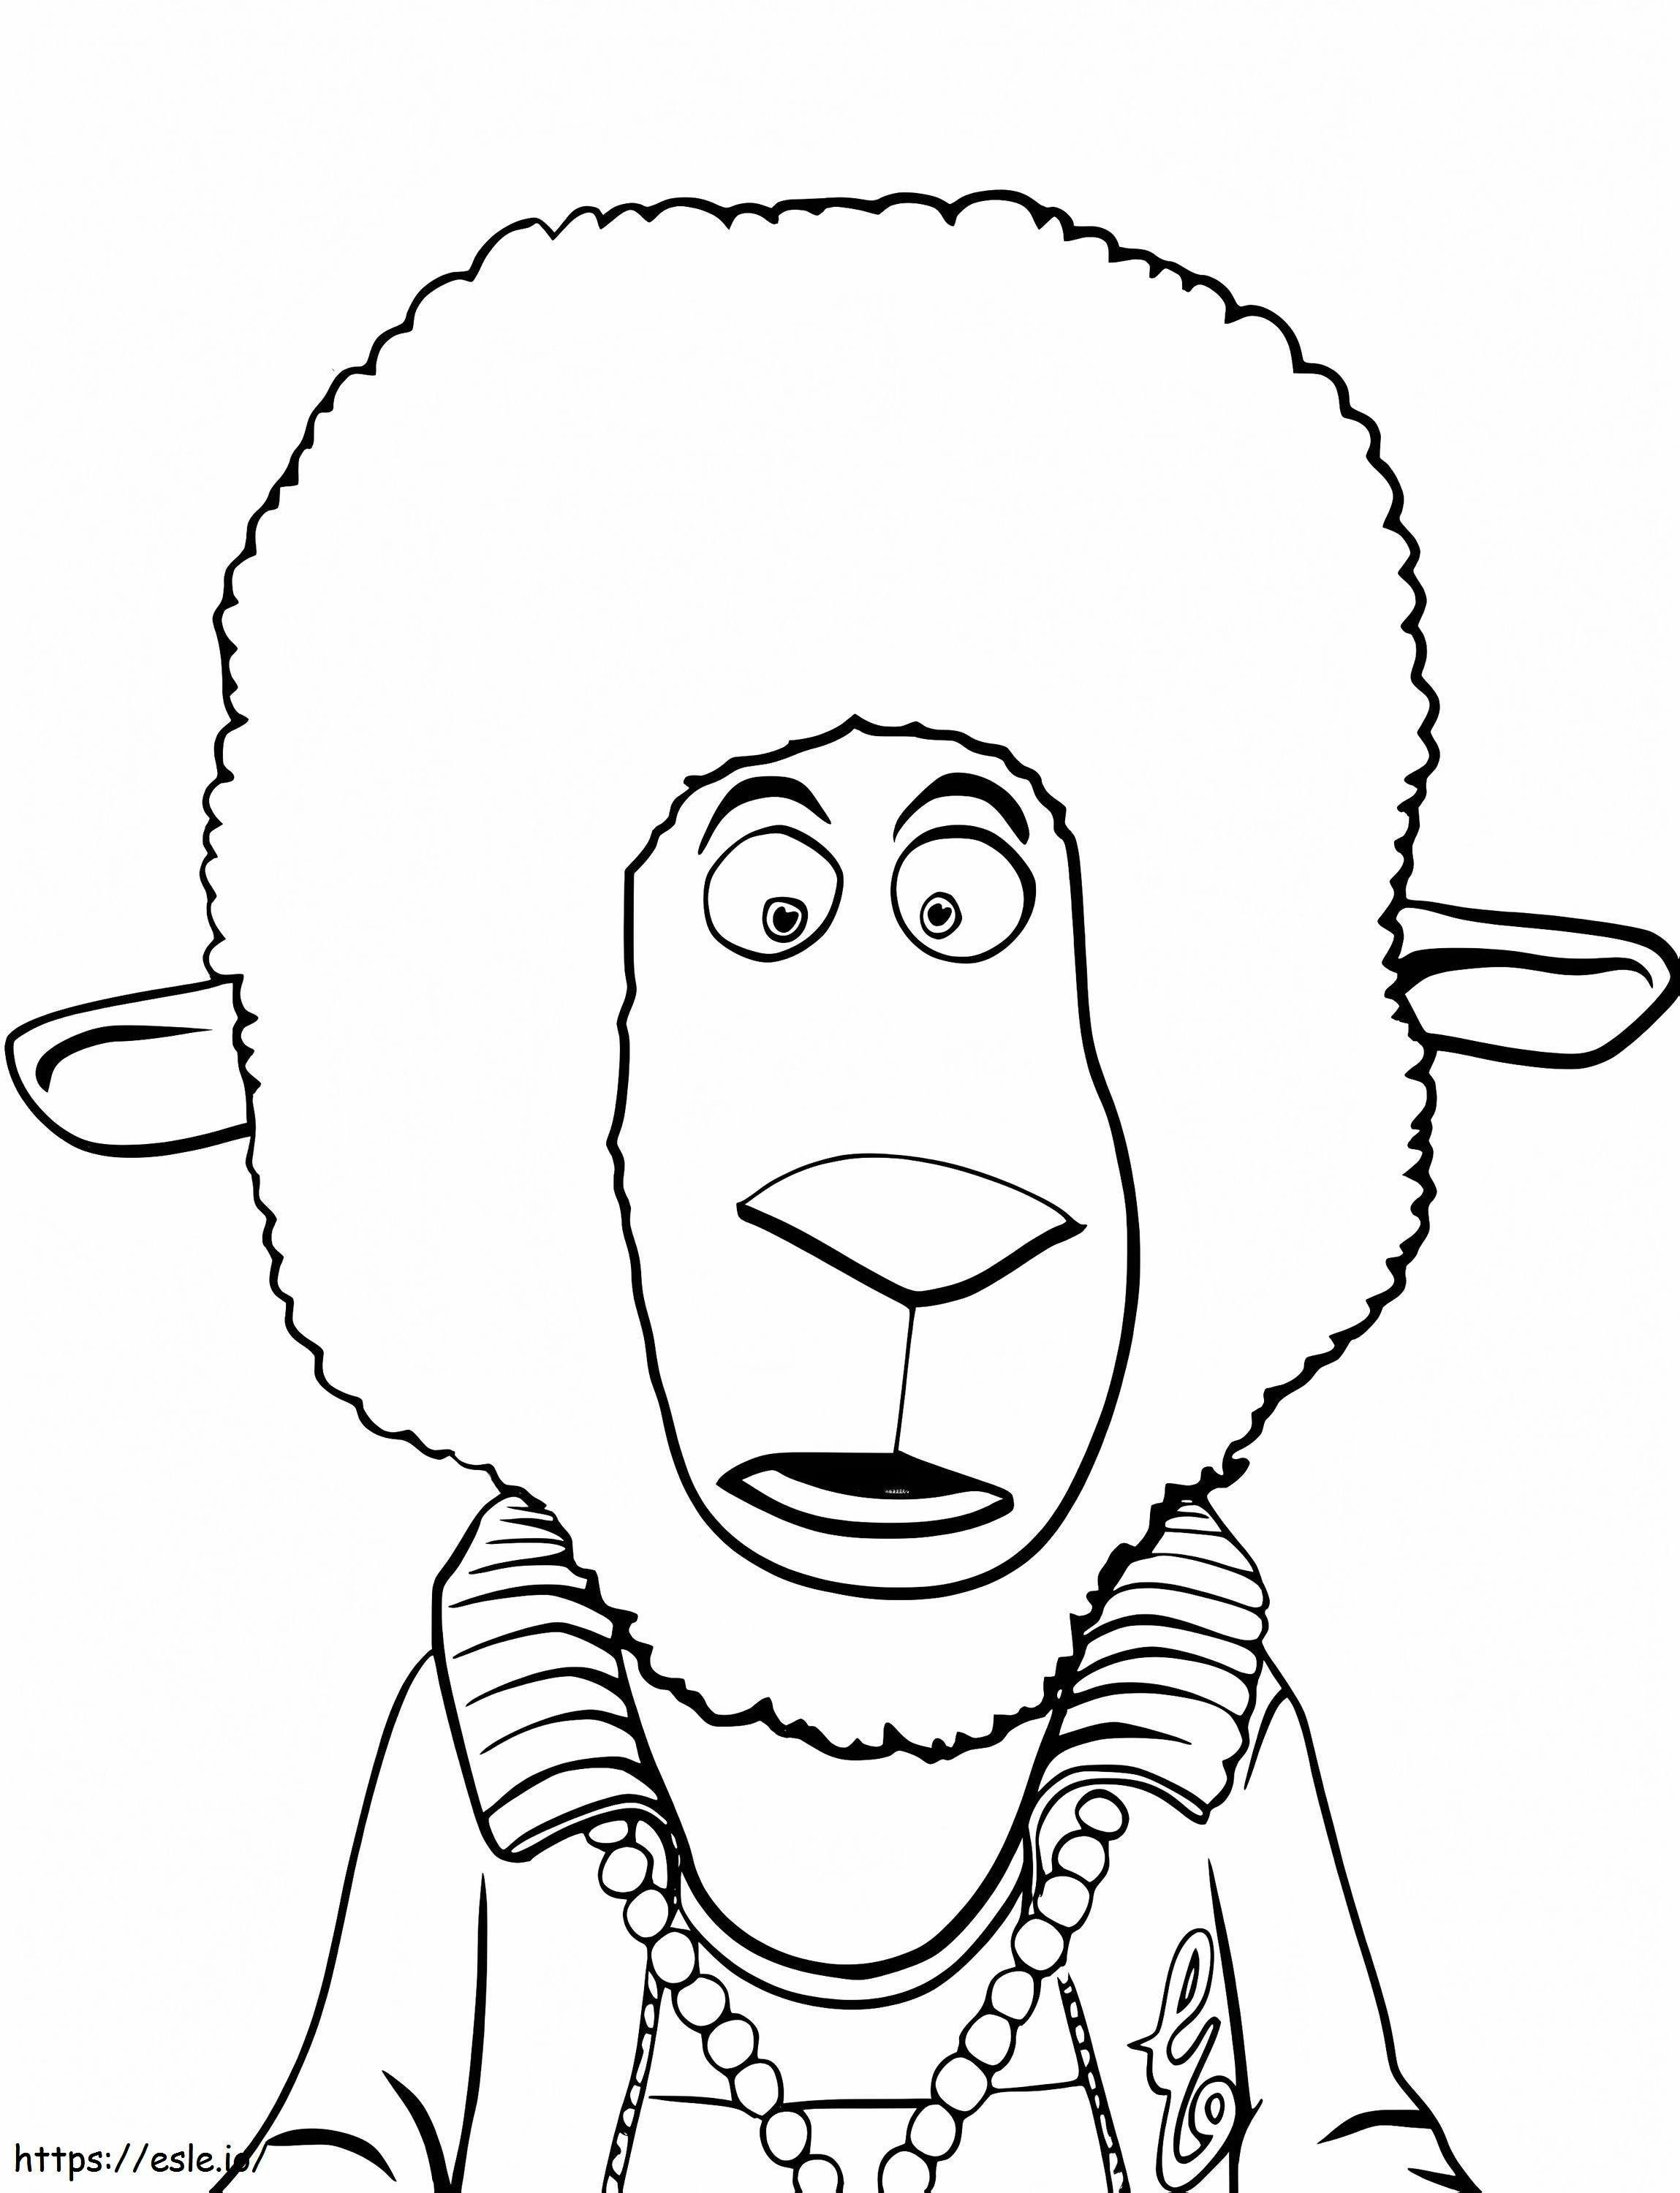 Eddie From Sing coloring page